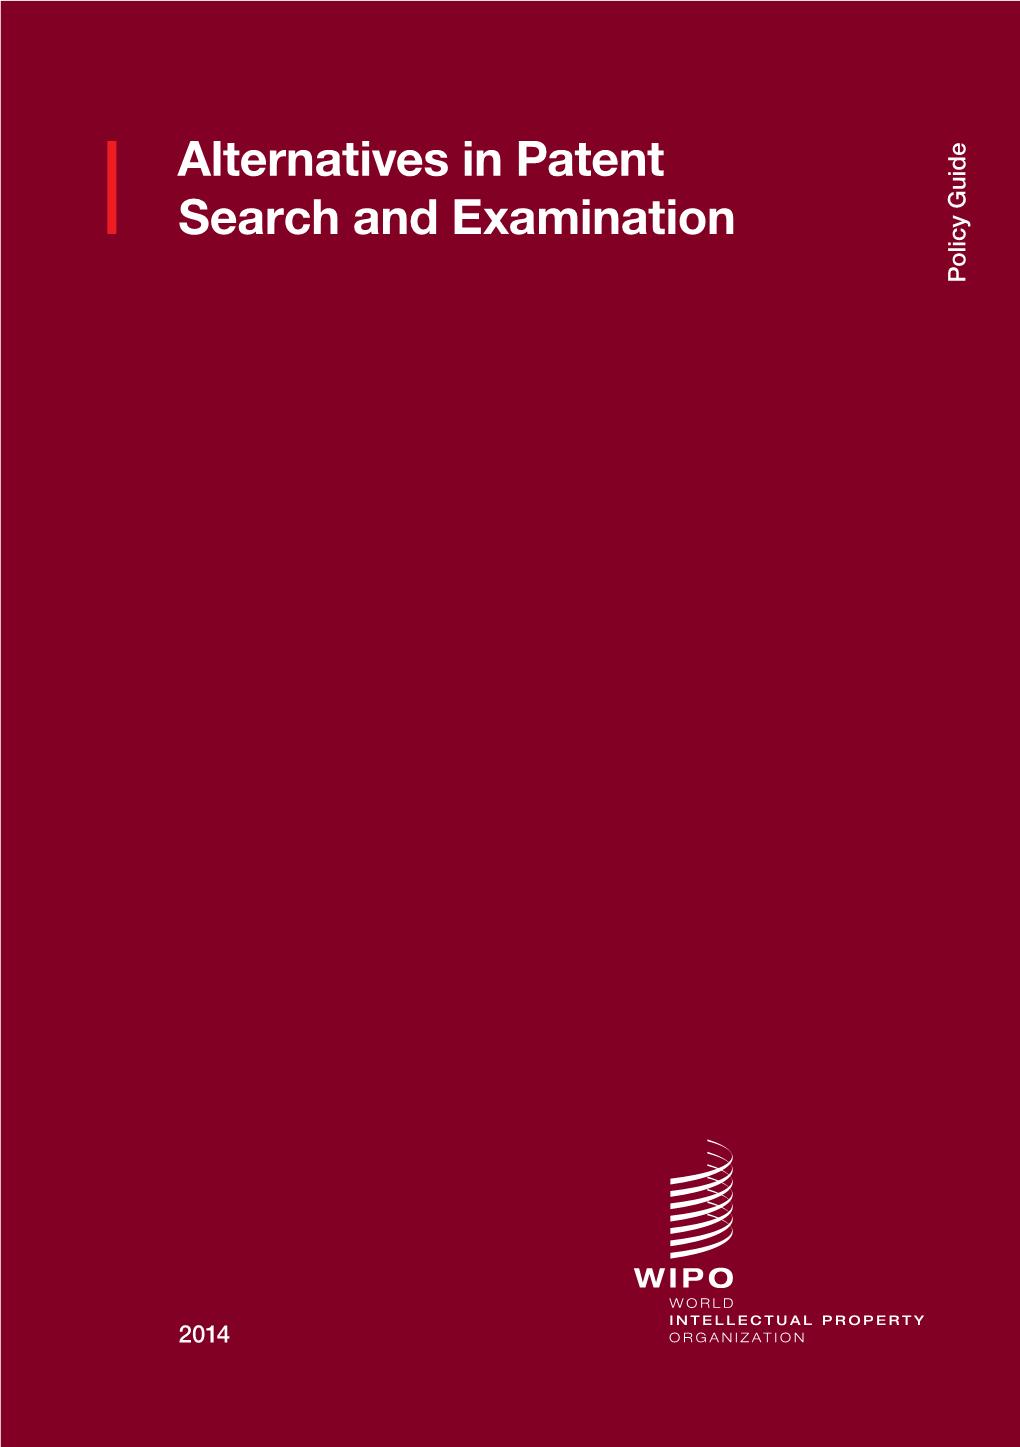 Alternatives in Patent Search and Examination